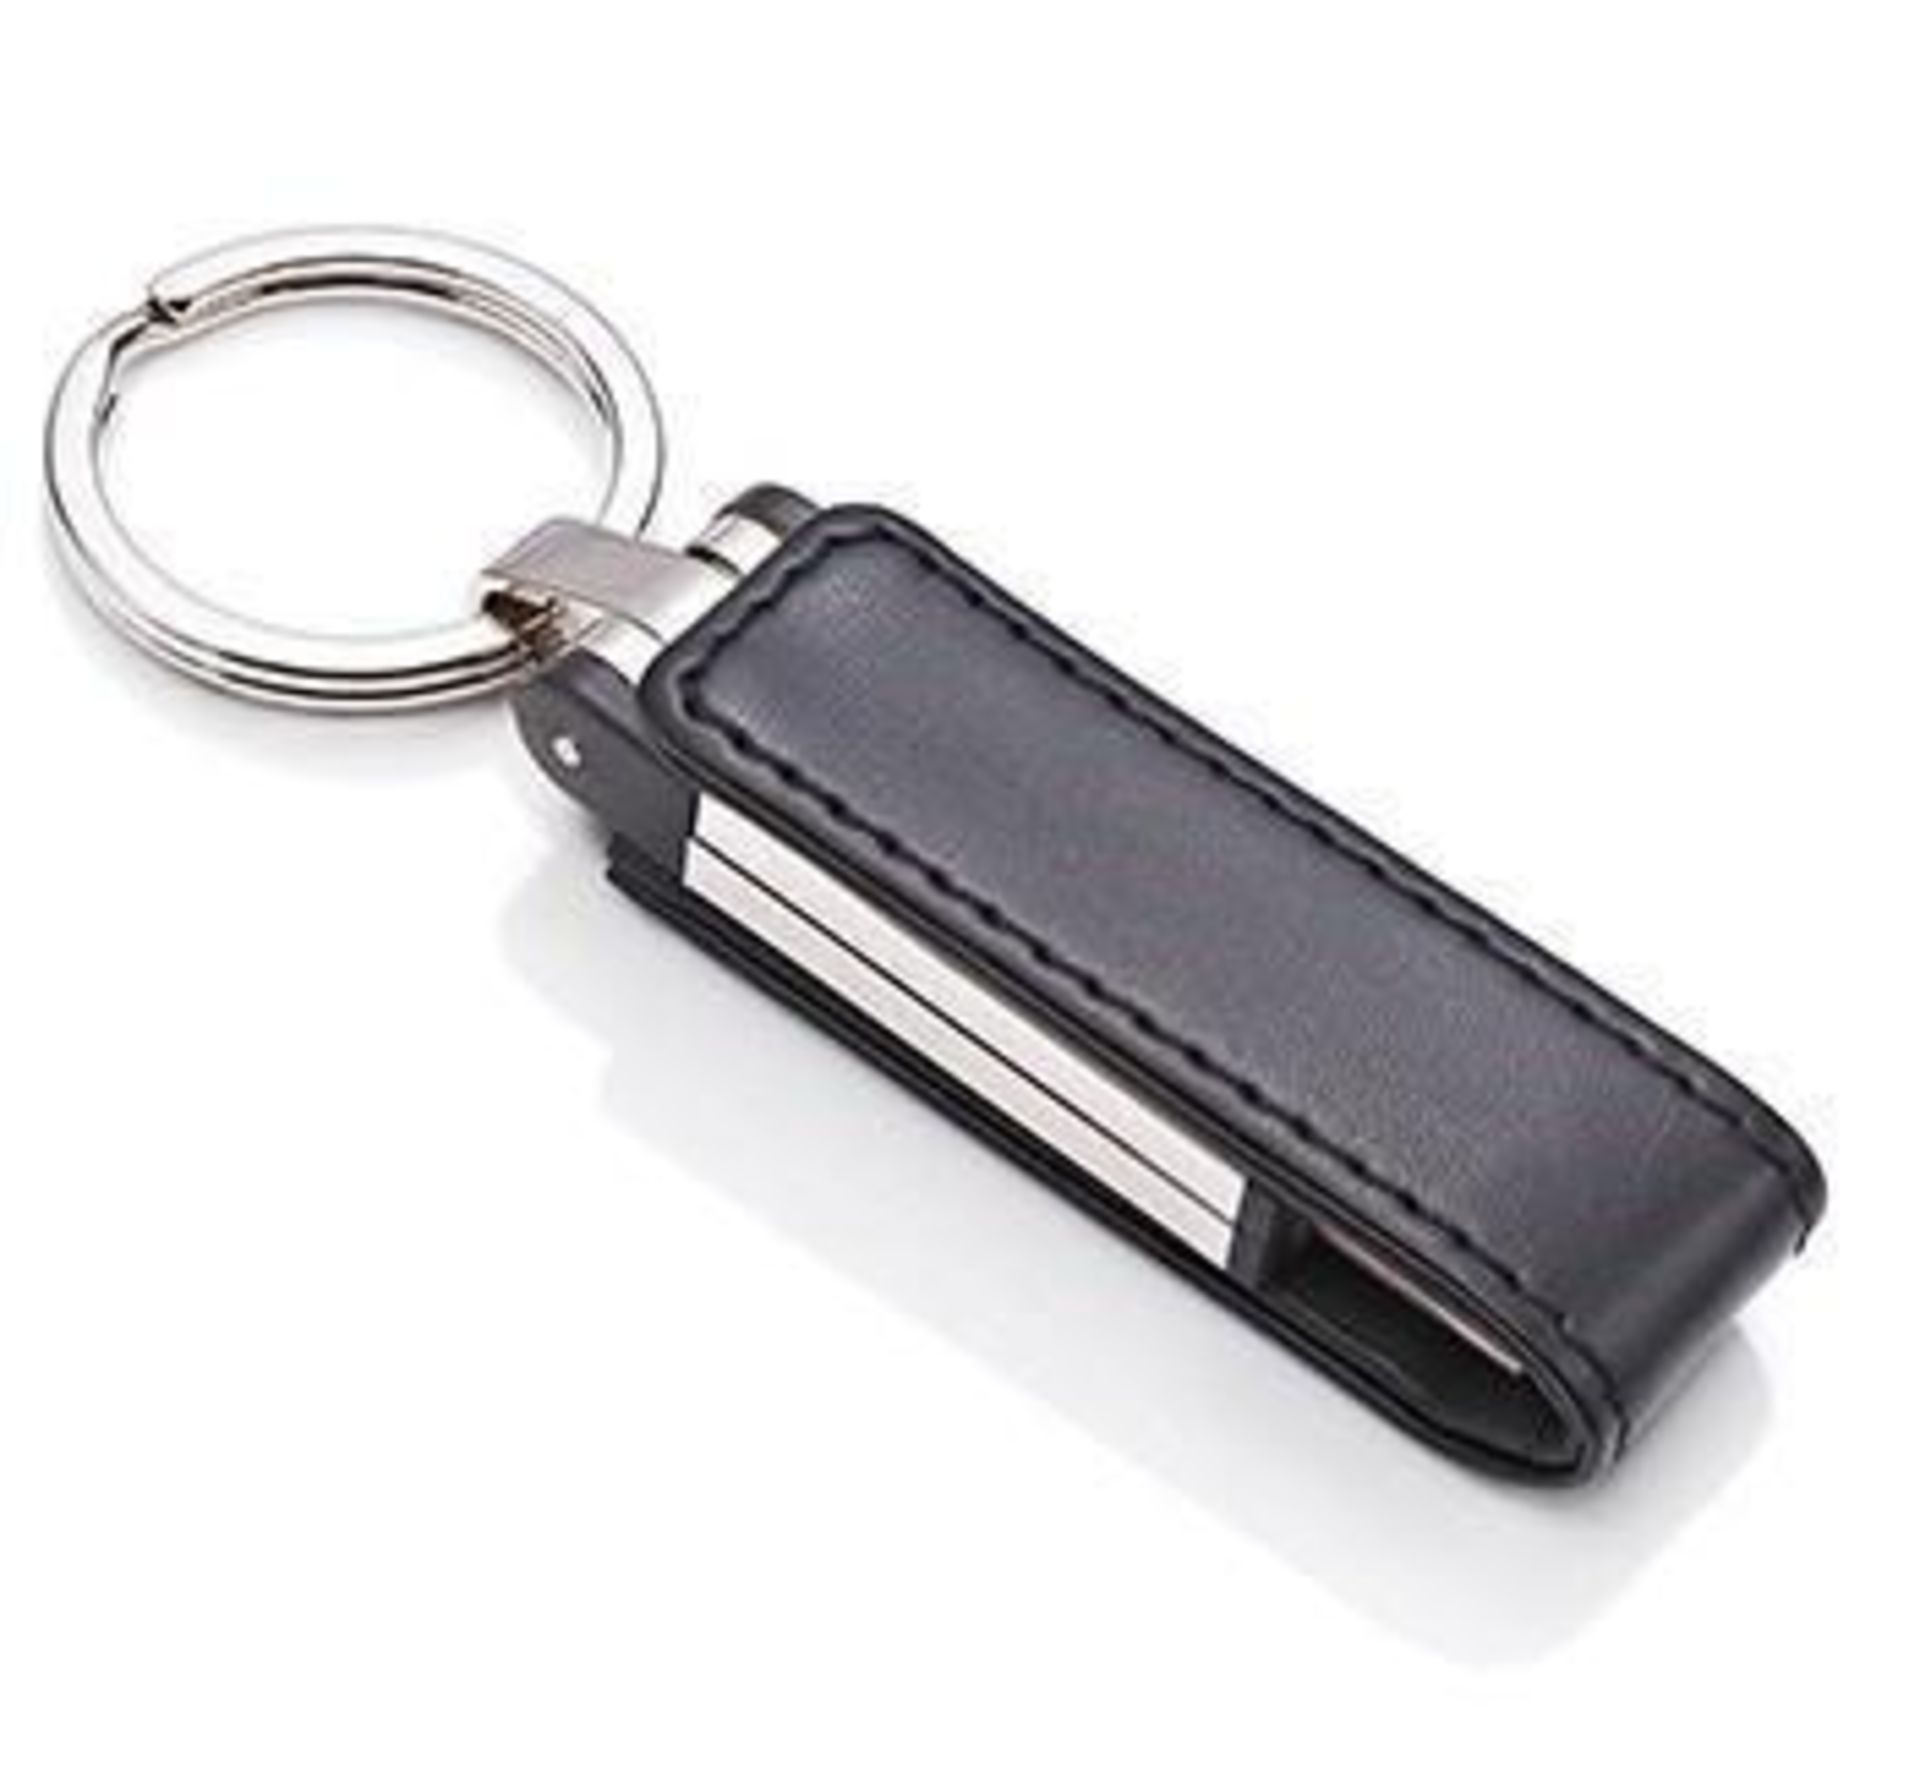 10 x ICE London Silver Plated 2GB USB Flashdrive Keyring - Features A Genuine Leather Wrap With Magn